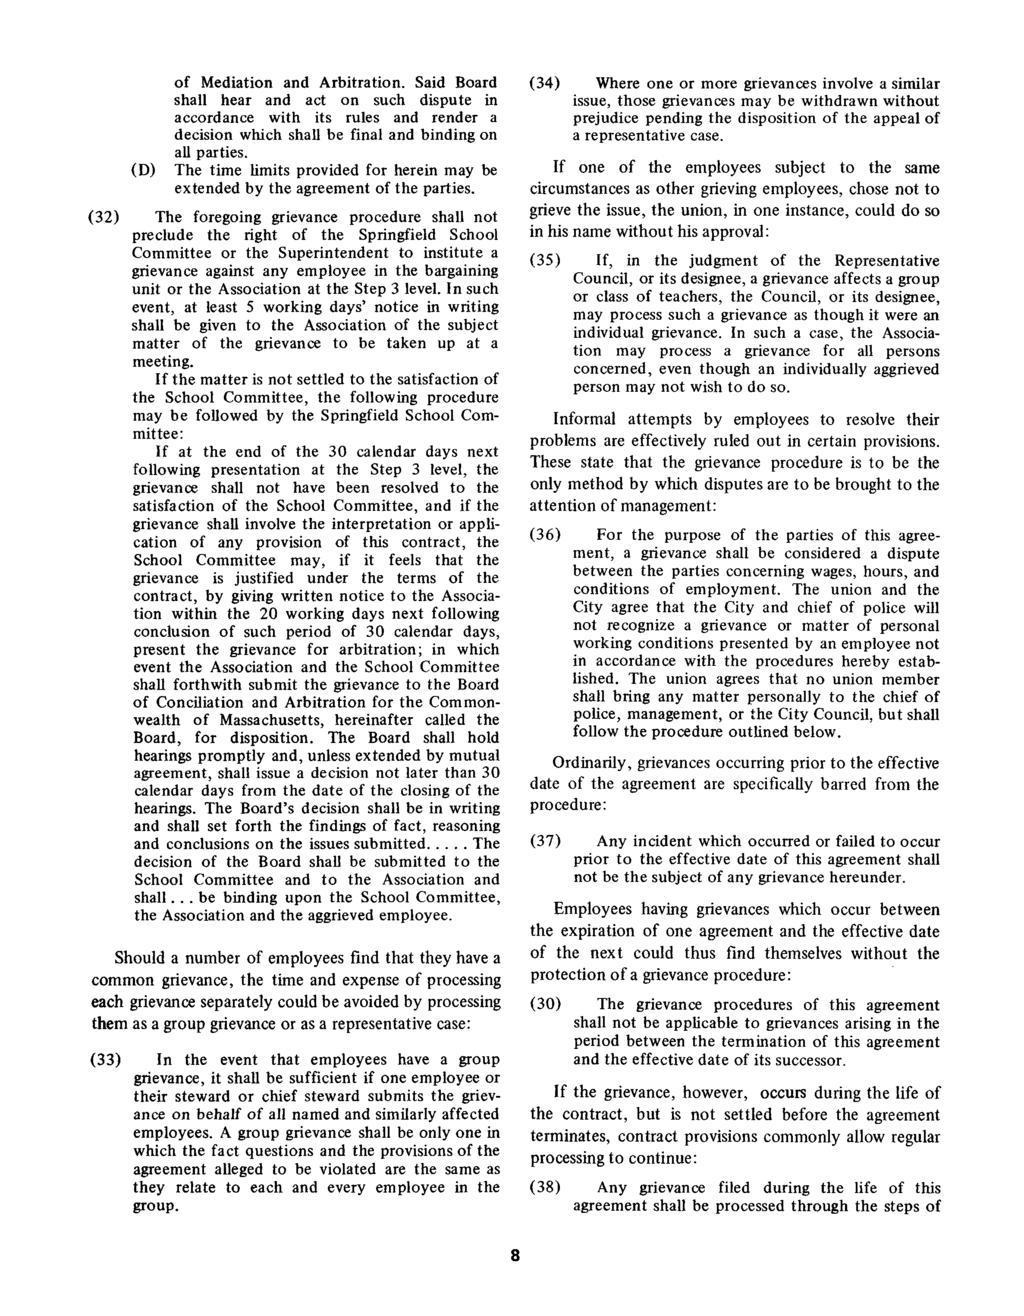 (D) of Mediation and Arbitration. Said Board shall hear and act on such dispute in accordance with its rules and render a decision which shall be final and binding on all parties.